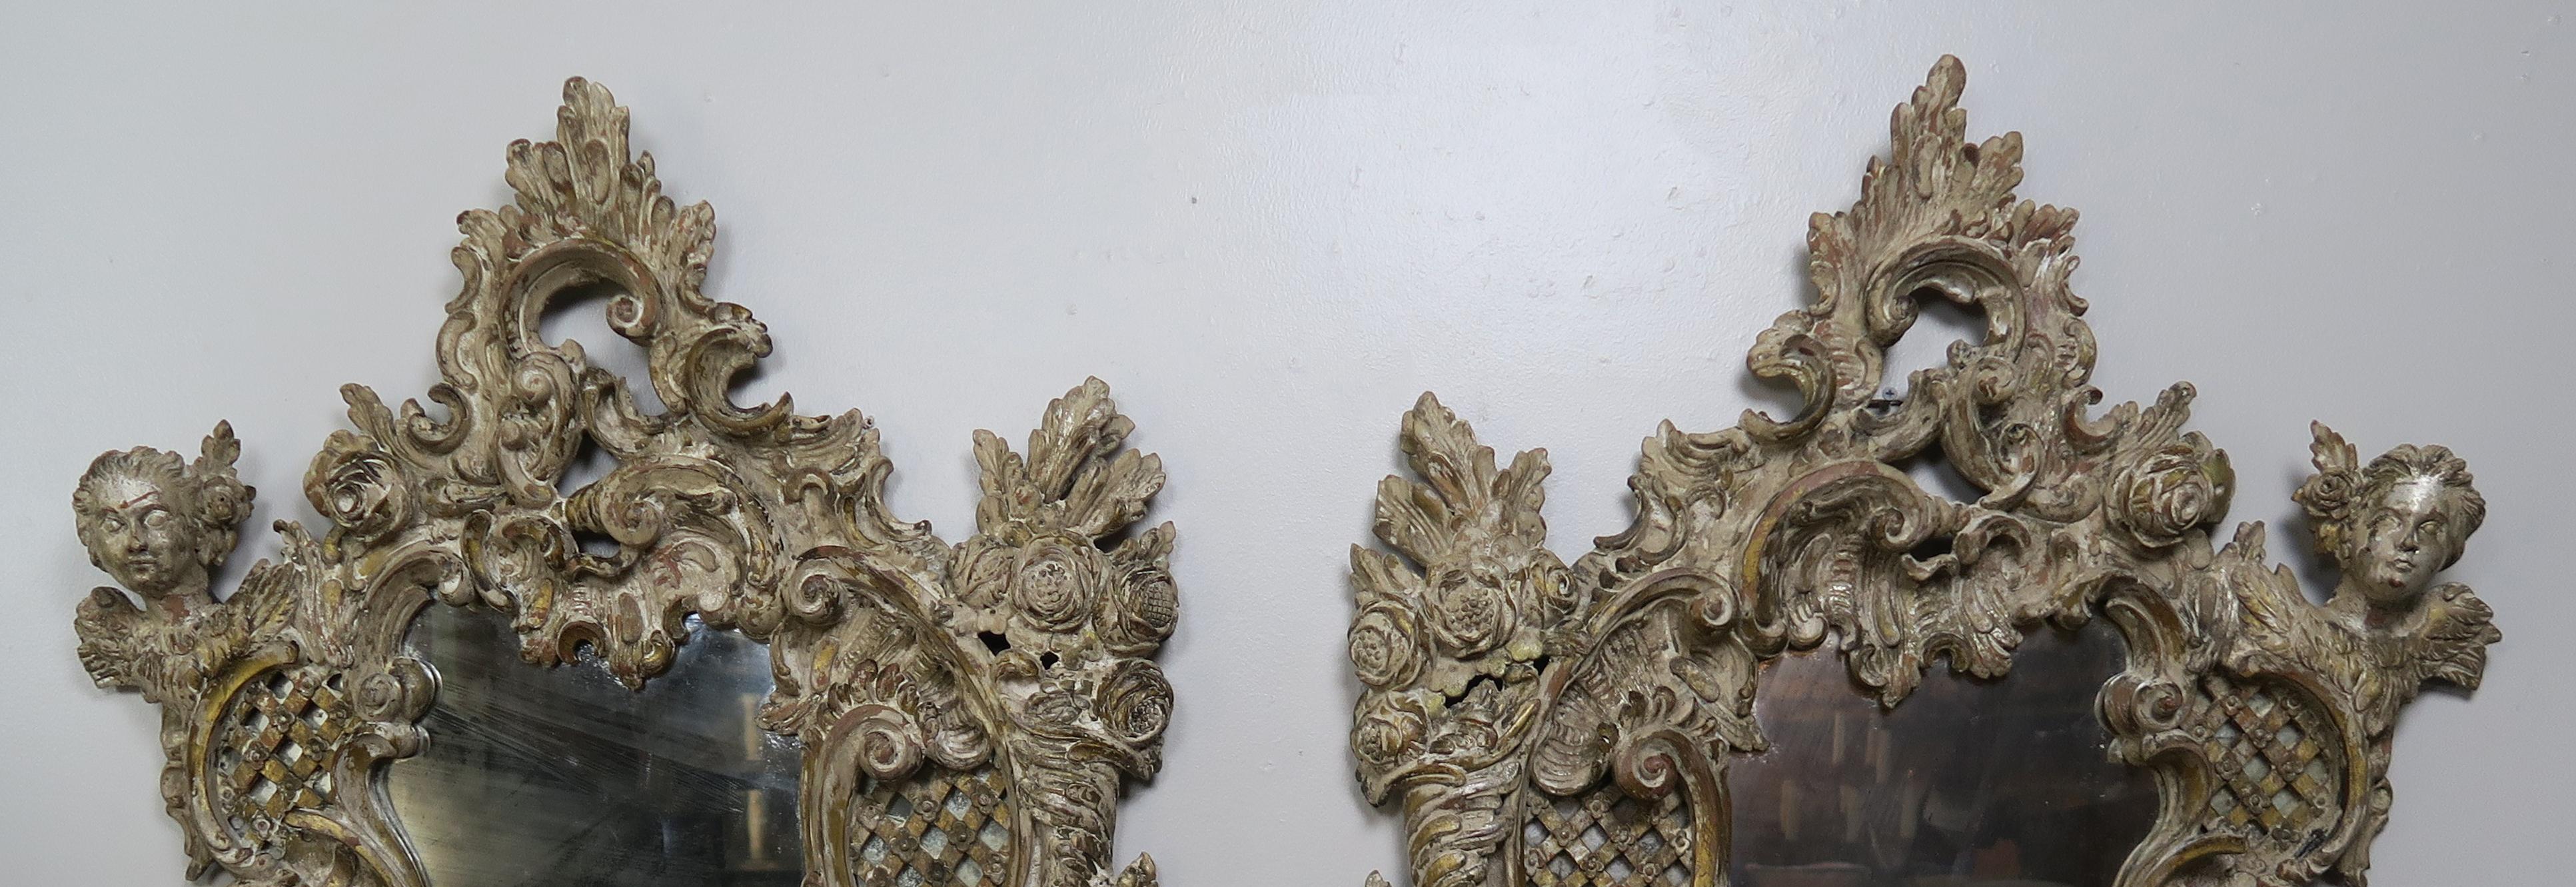 Pair of 19th Century Rococo style Italian Carved Mirrors with Cherubs. The hand carved mirrors are detailed with roses, acanthus leaves, cherub faces and so much more. Beautiful distressed finish with bits of silver leaf and paint remaining.